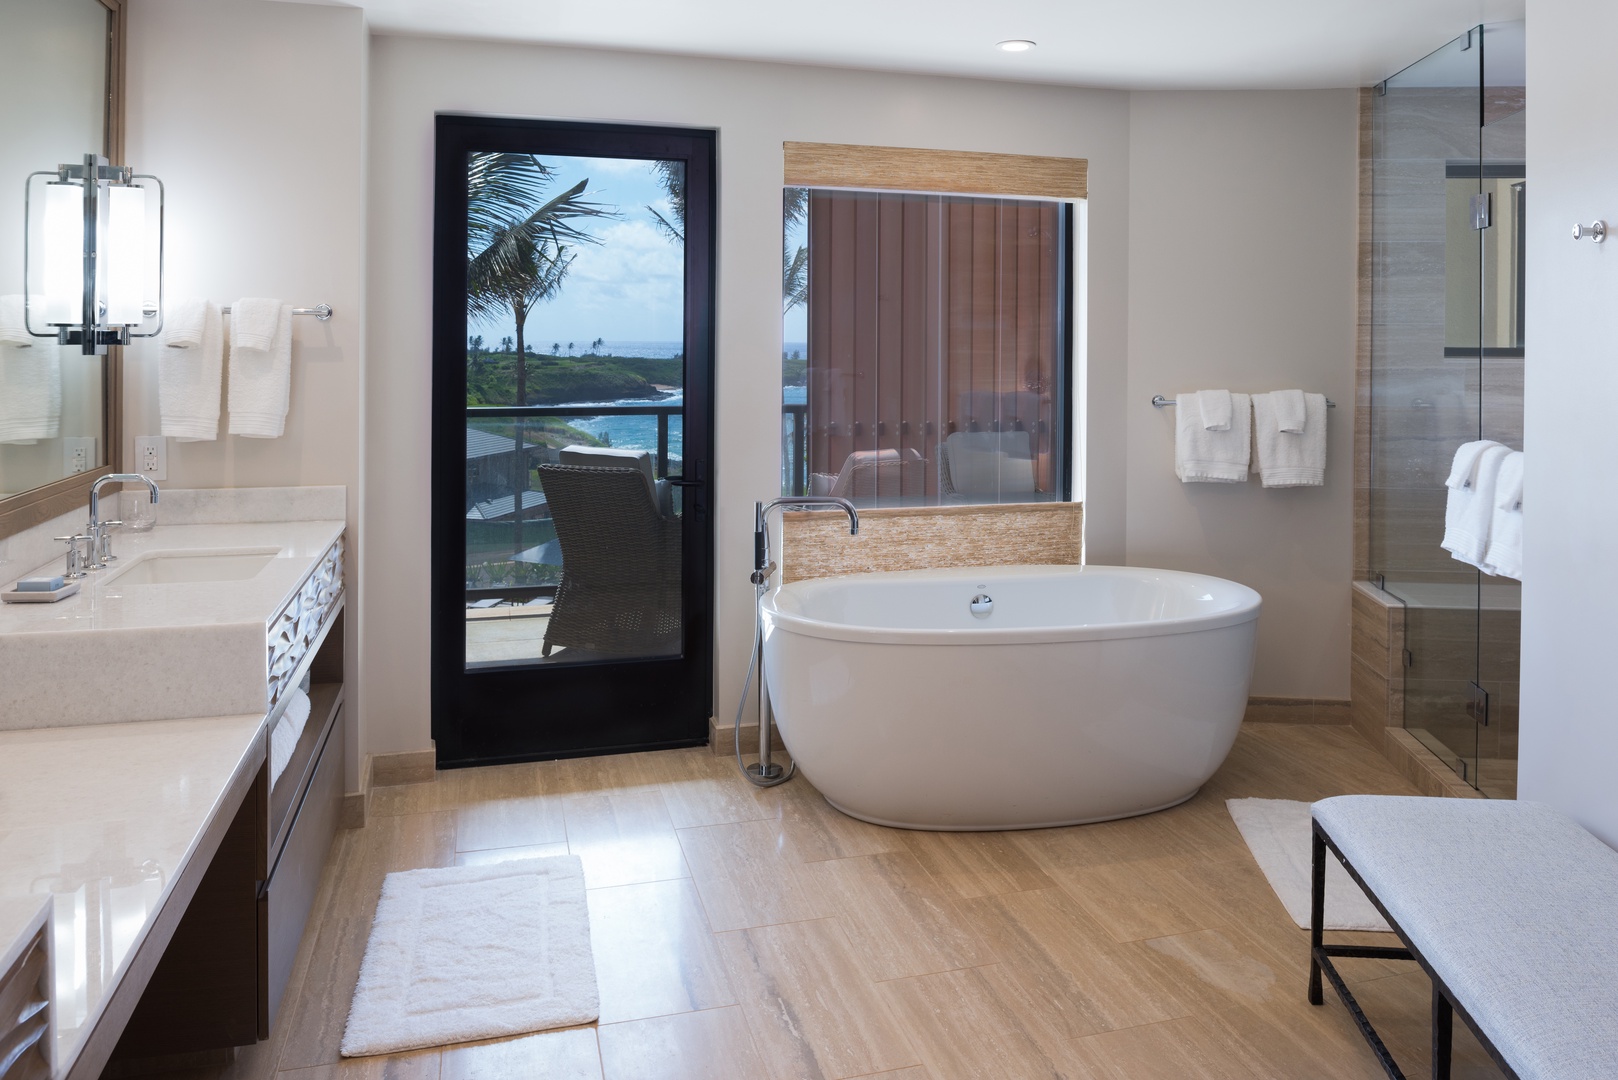 Lihue Vacation Rentals, Maliula at Hokuala 3BR Premiere* - Each primary bath boasts a soaking tub, a separate shower, and dual vanities.